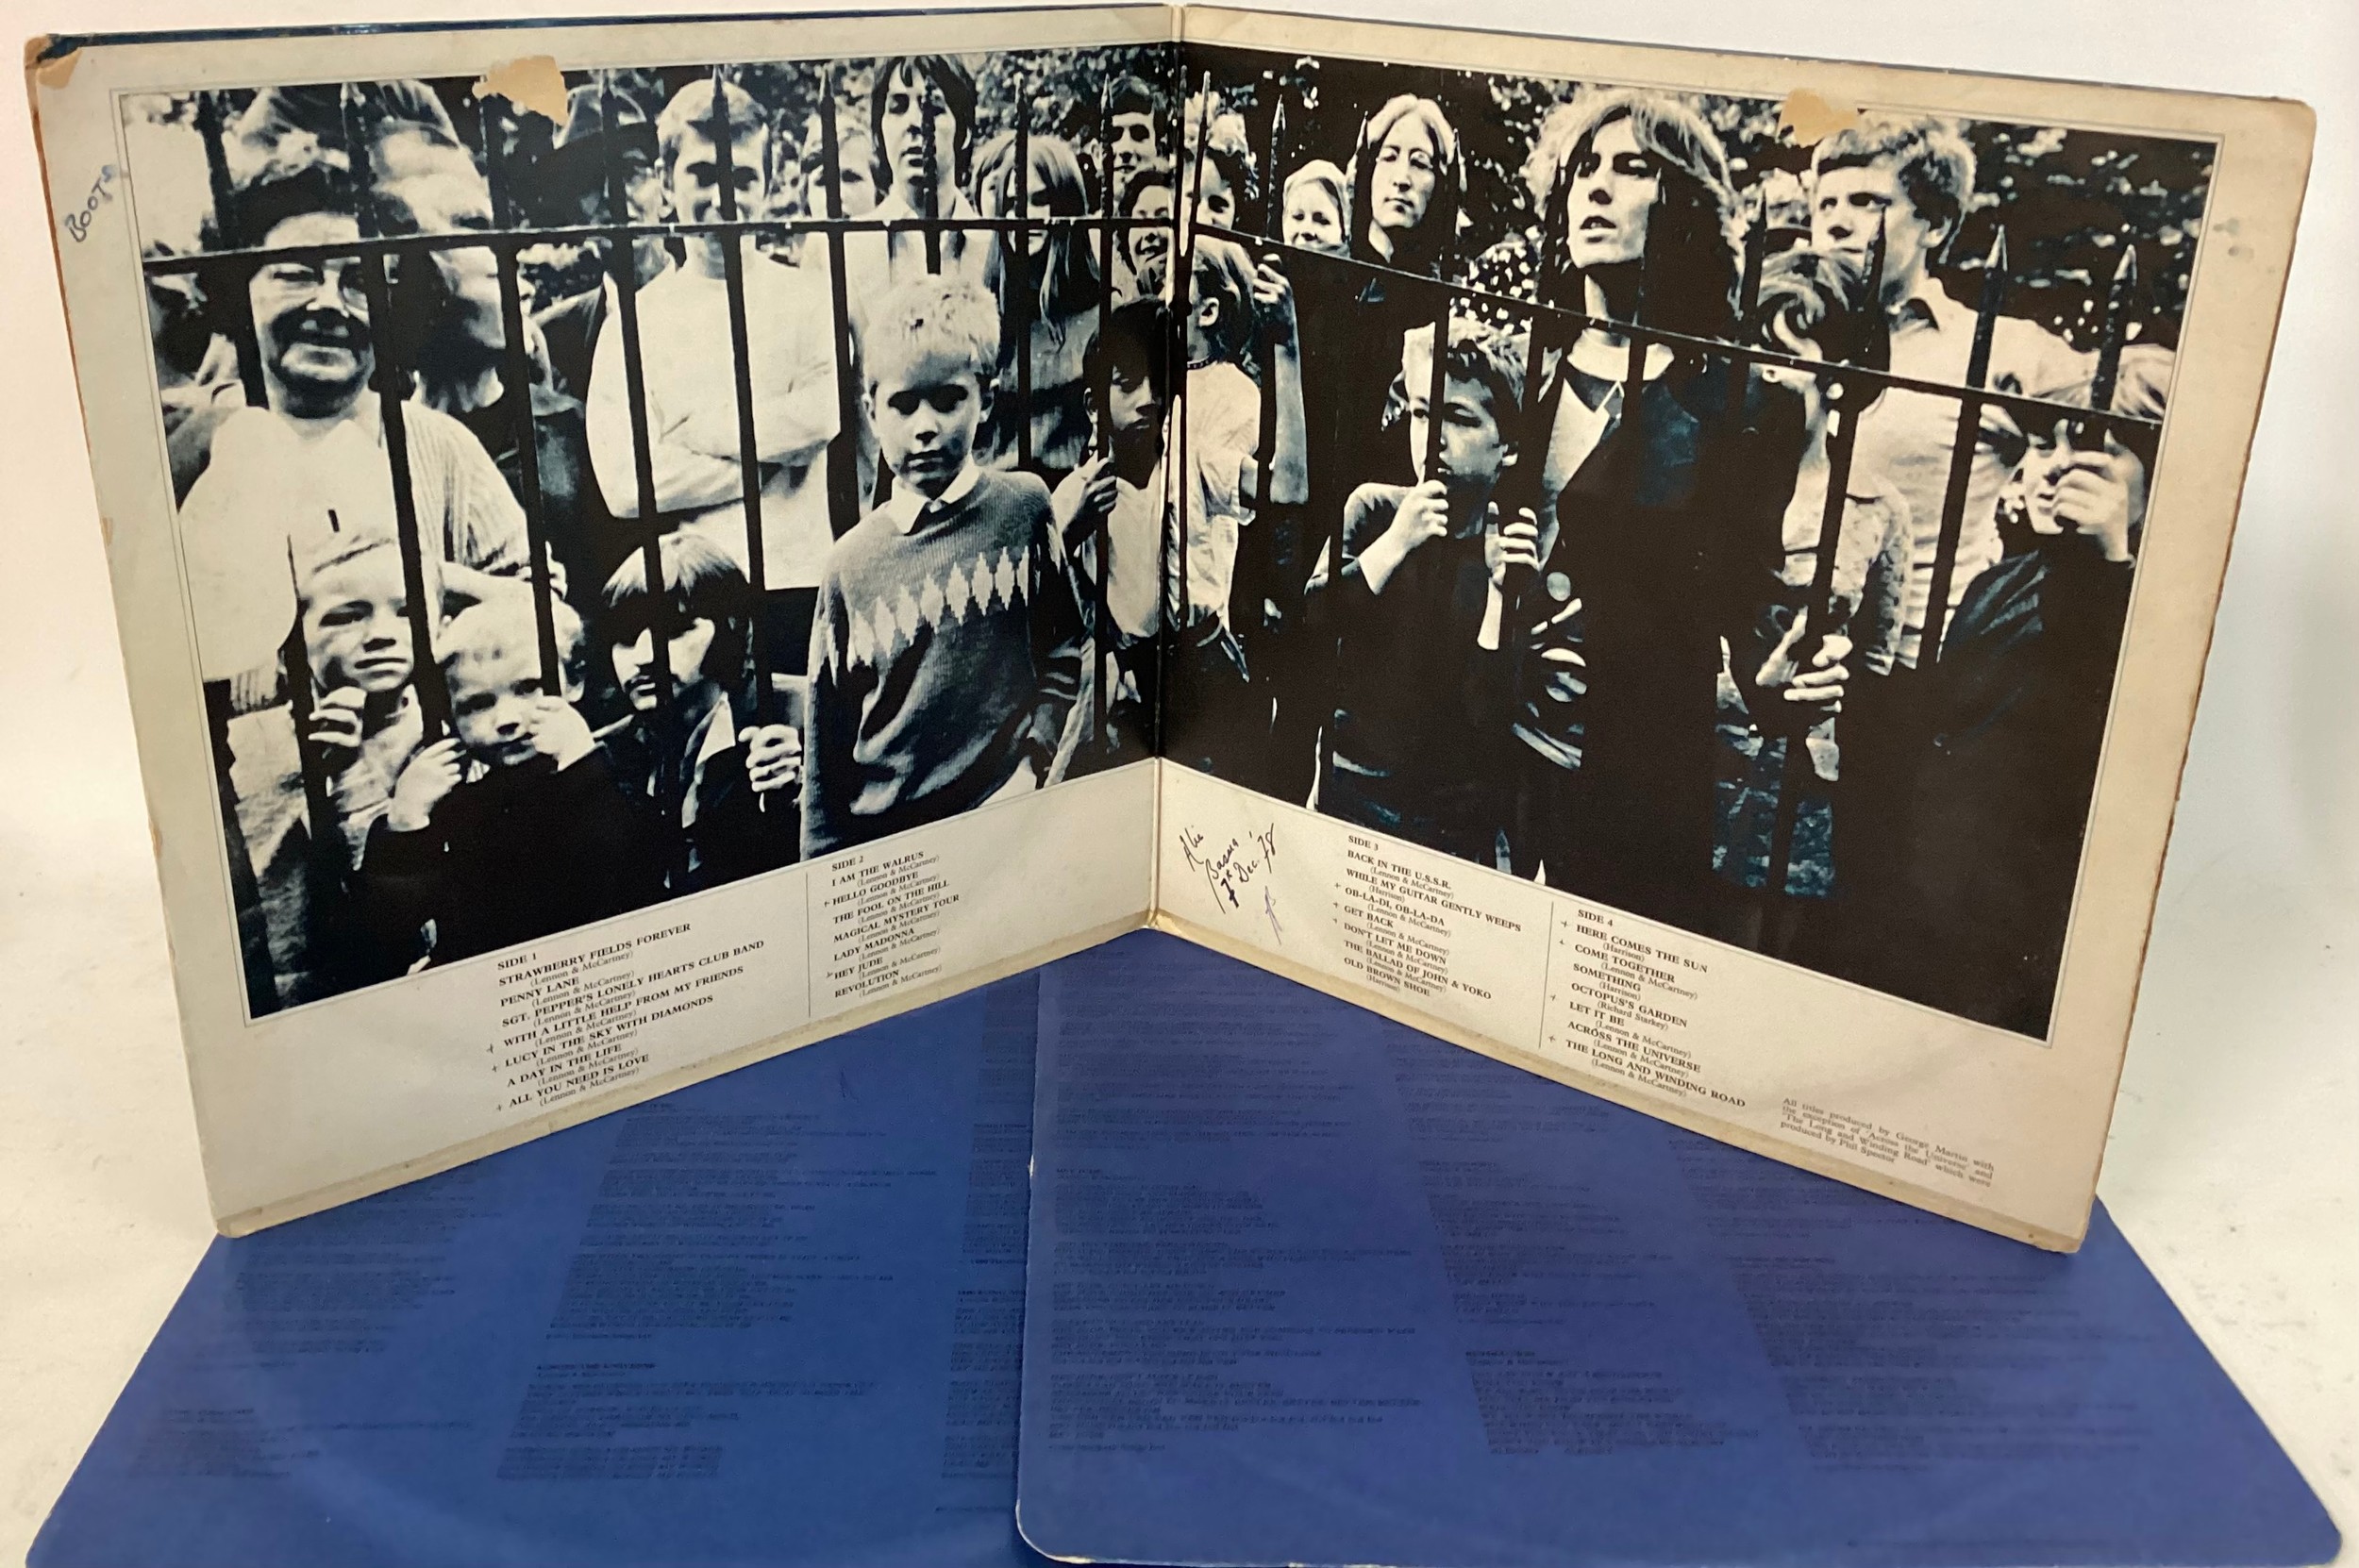 THE BEATLES VINYL ALBUMS X 2. Here we have a copy of ‘1962/1966’ on black vinyl in gatefold sleeve - Image 4 of 6